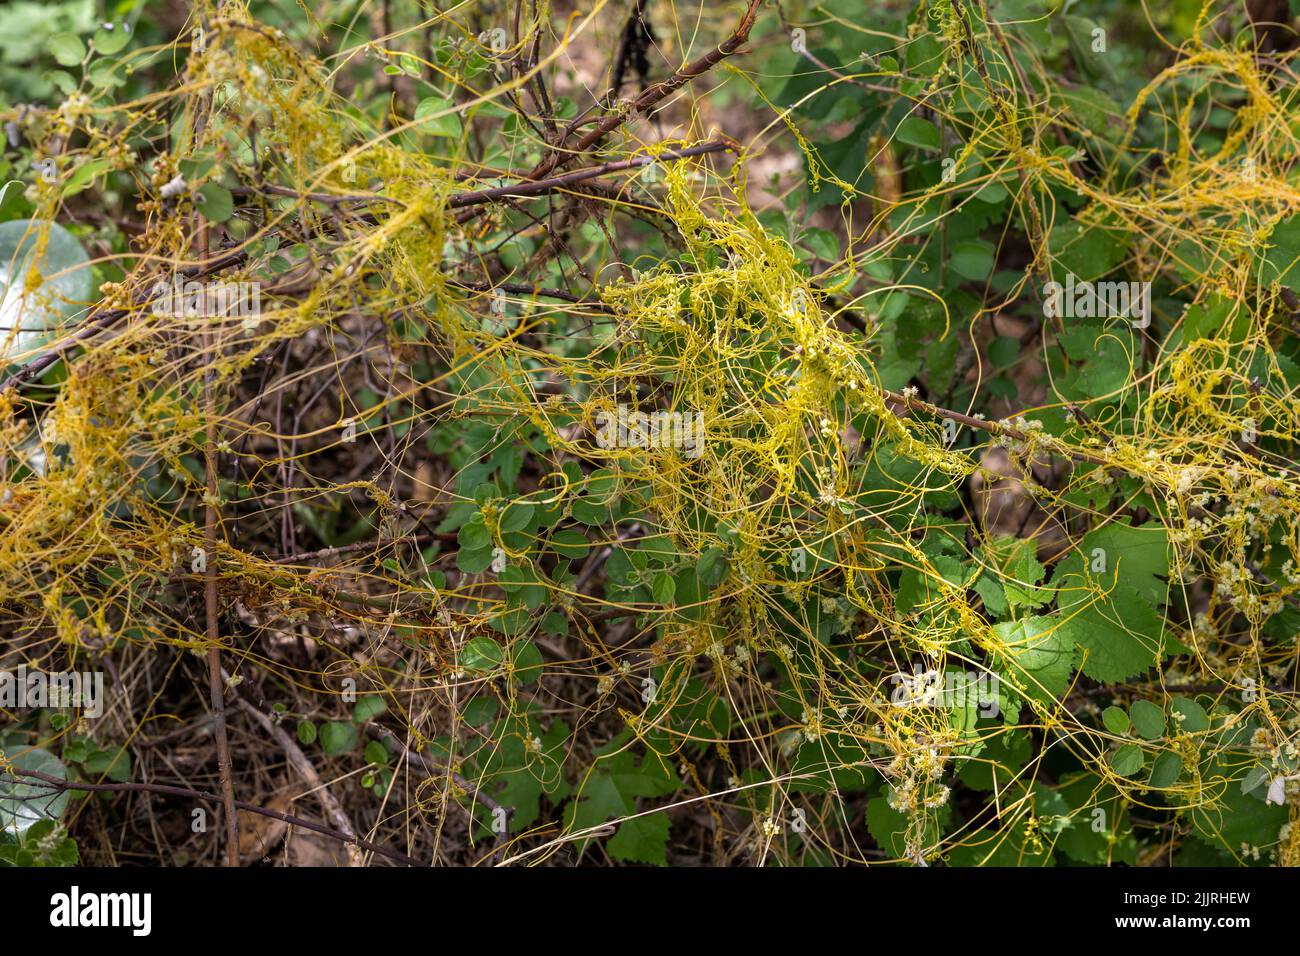 Dodder cuscuta parasitic plant choking the agricultural crops in the fields Stock Photo